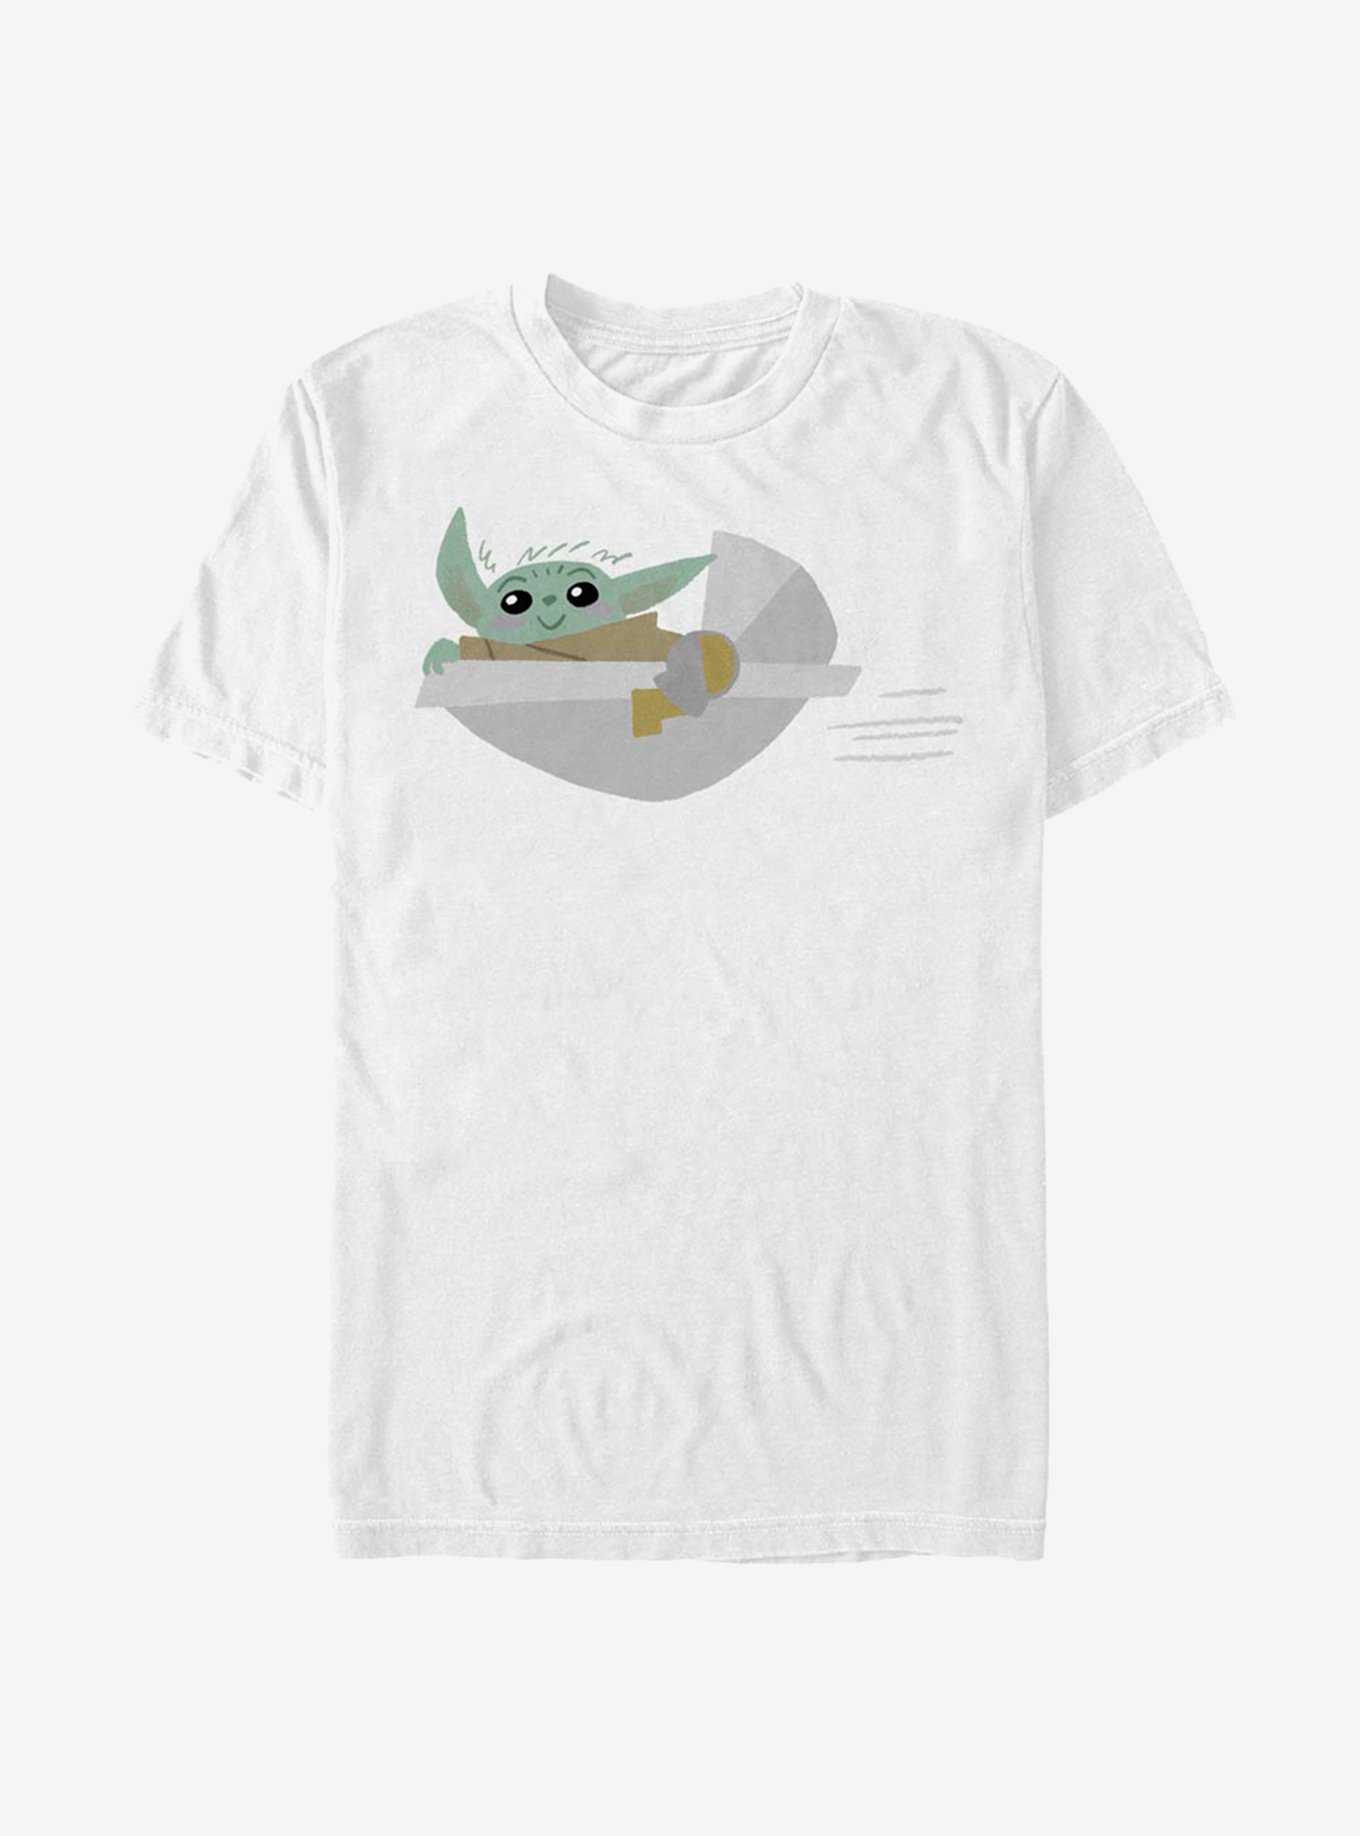 Star Wars The Mandalorian The Child Flying By T-Shirt, , hi-res